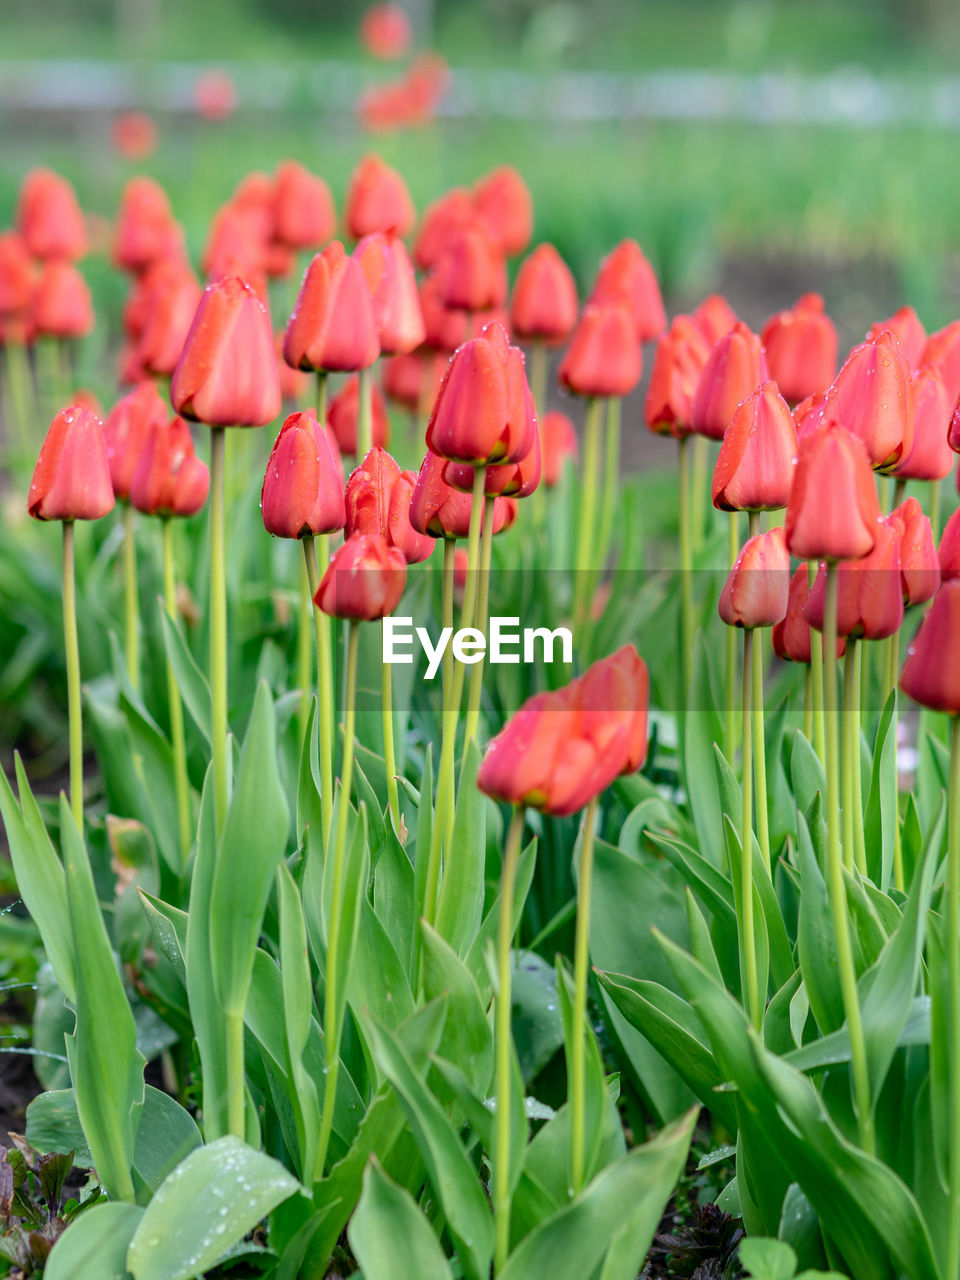 plant, flower, flowering plant, beauty in nature, freshness, nature, red, petal, growth, fragility, pink, close-up, tulip, leaf, plant part, flower head, inflorescence, no people, green, focus on foreground, outdoors, springtime, day, land, blossom, botany, flowerbed, landscape, field